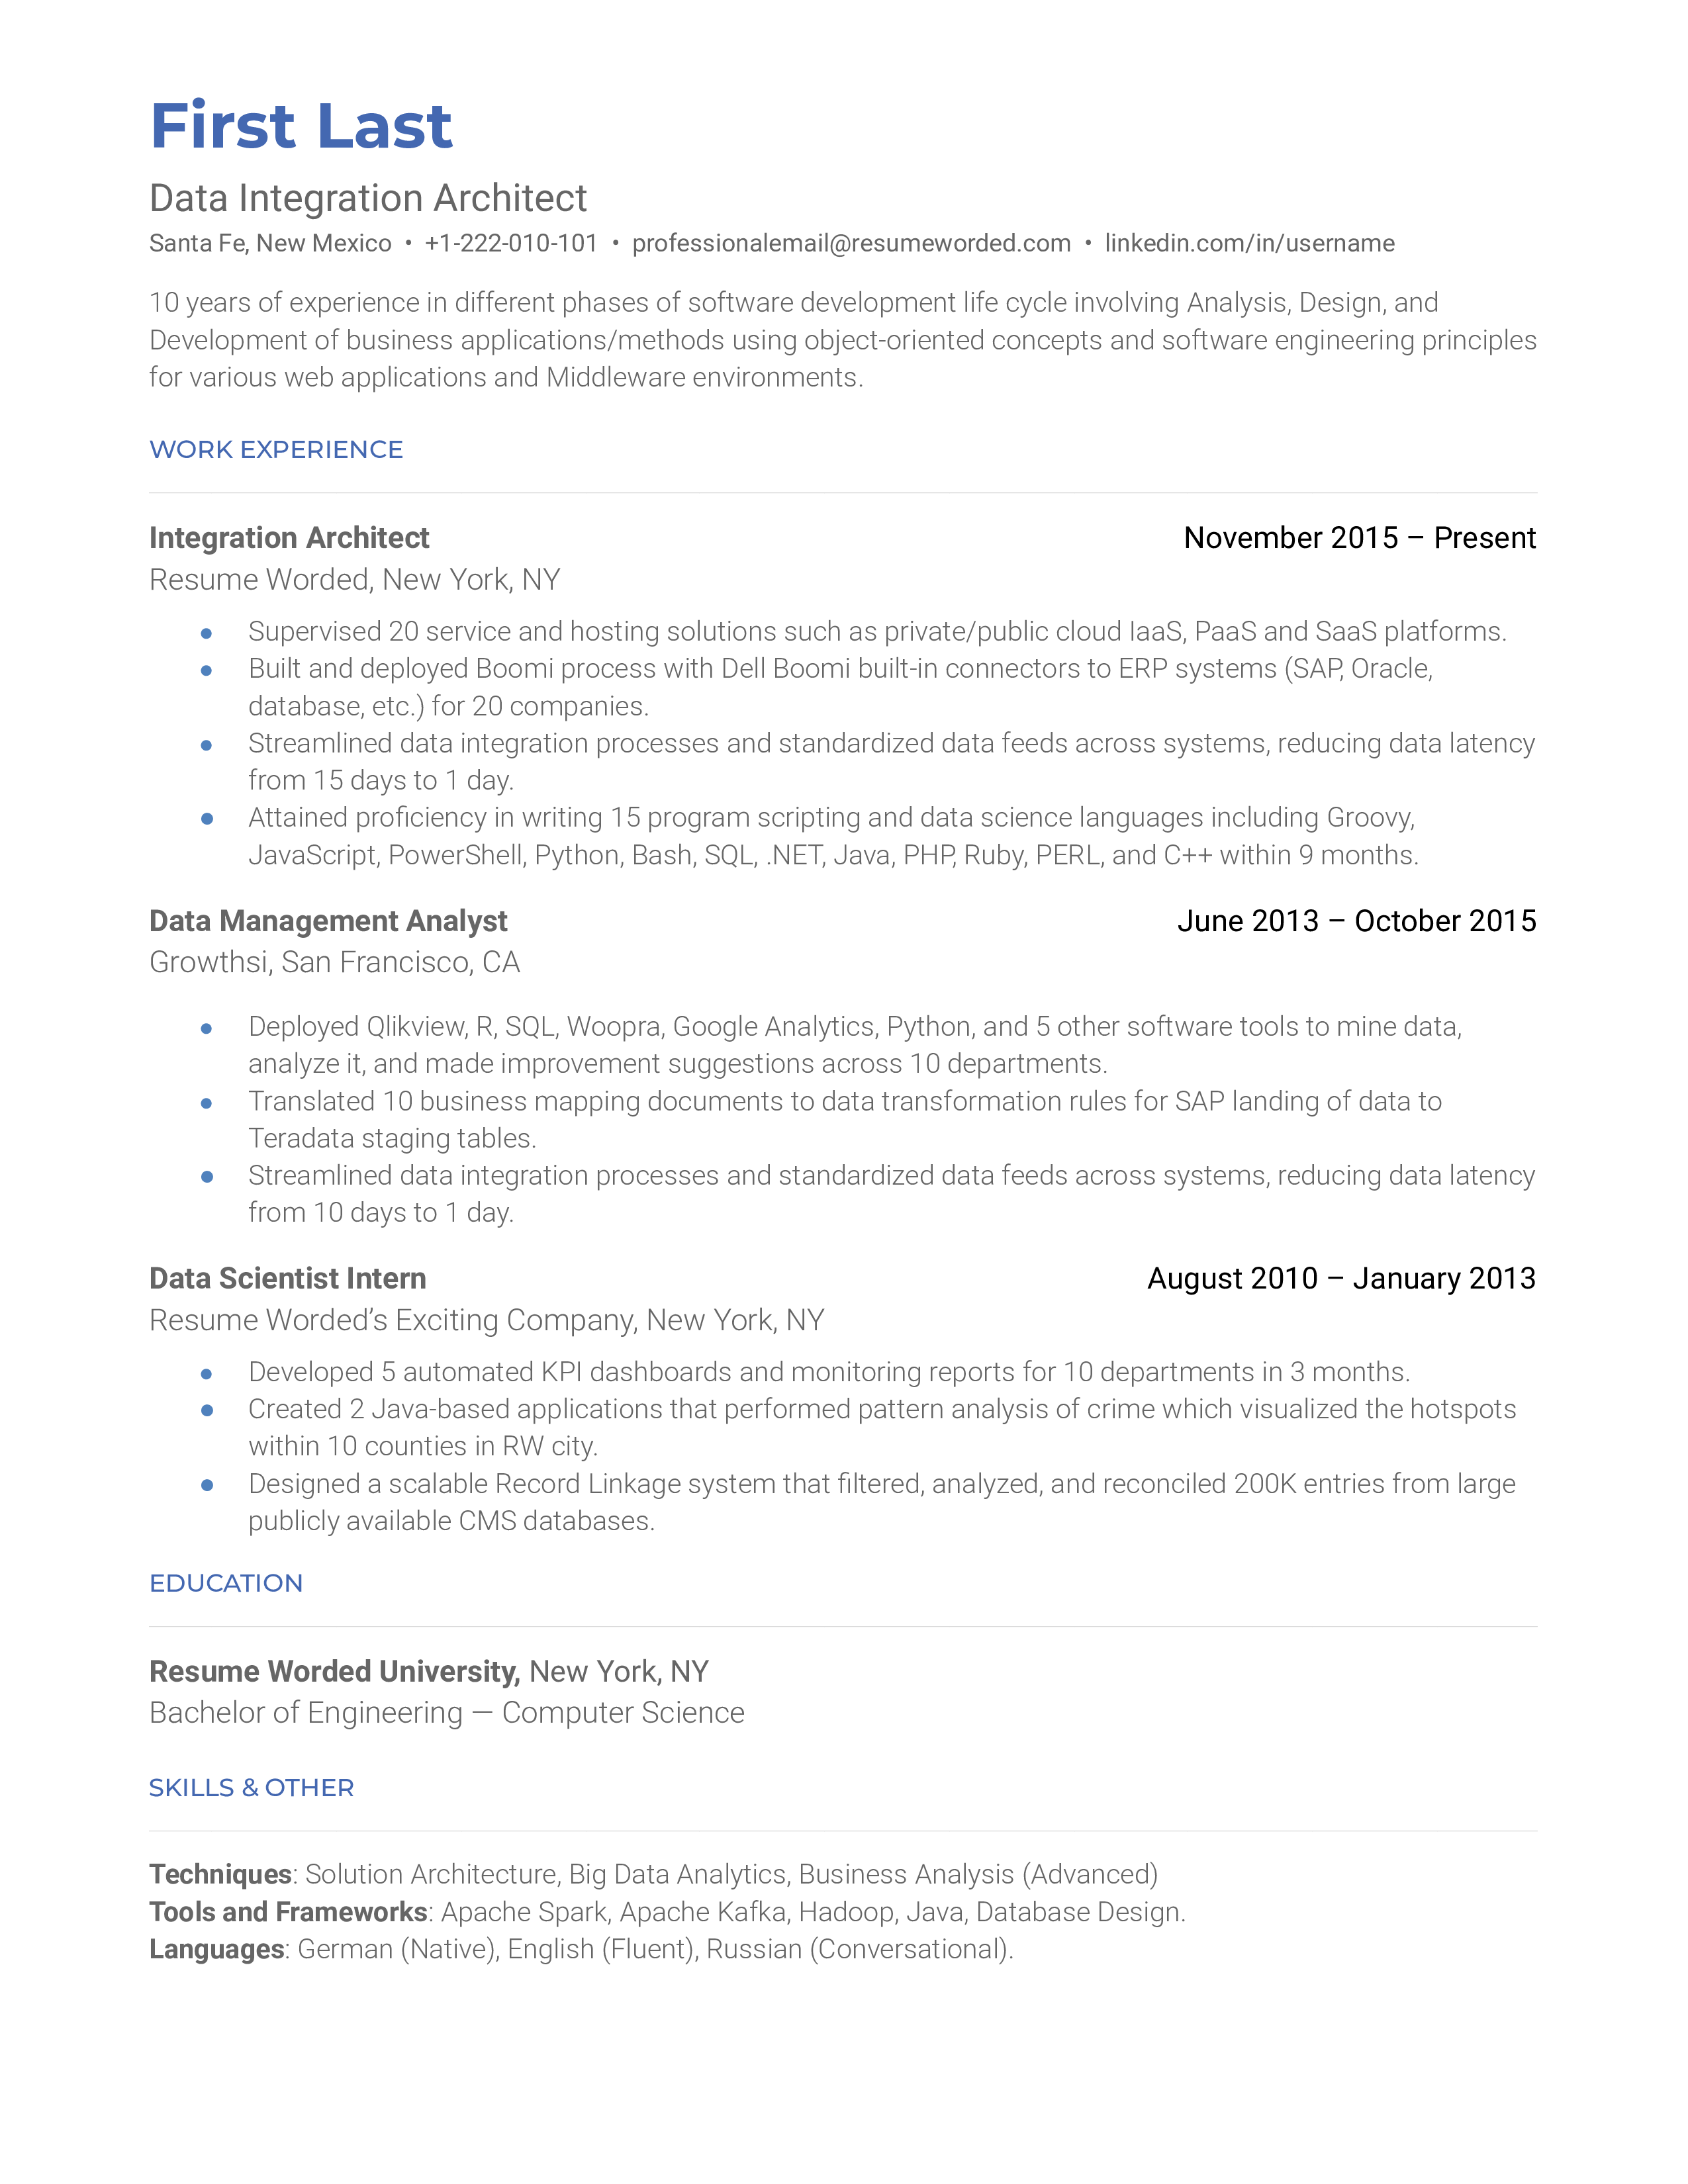 A data integration architecture resume showing applicant's experience in Software Development Life Cycle